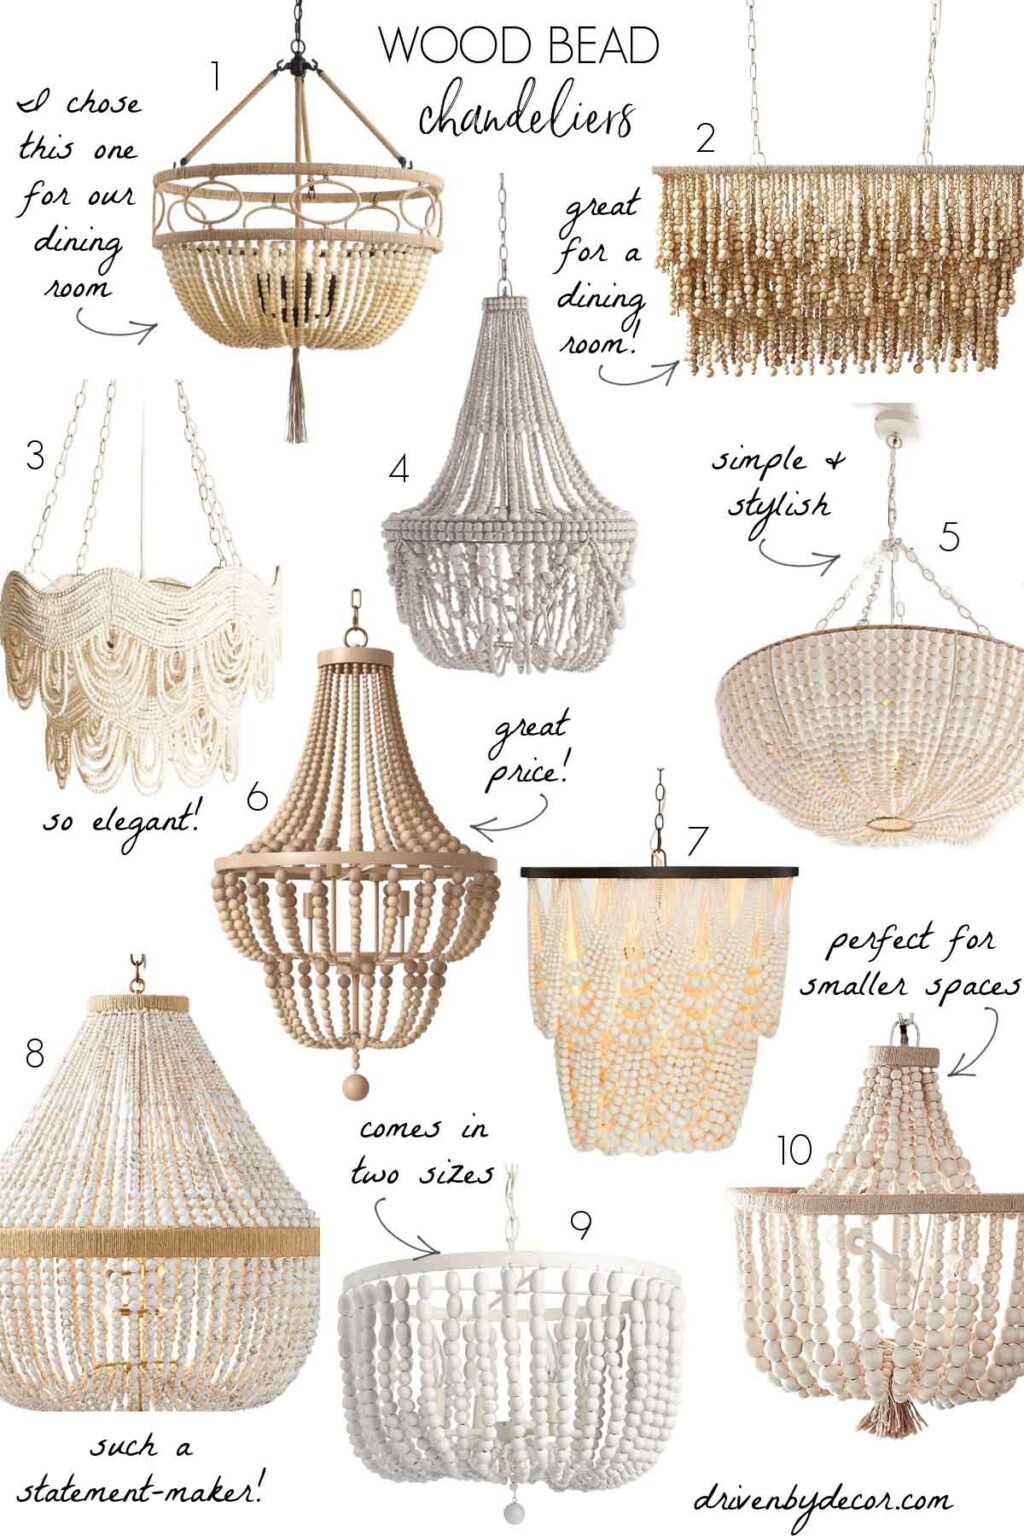 Wood Bead Chandeliers 10 Stunning Options Driven By Decor